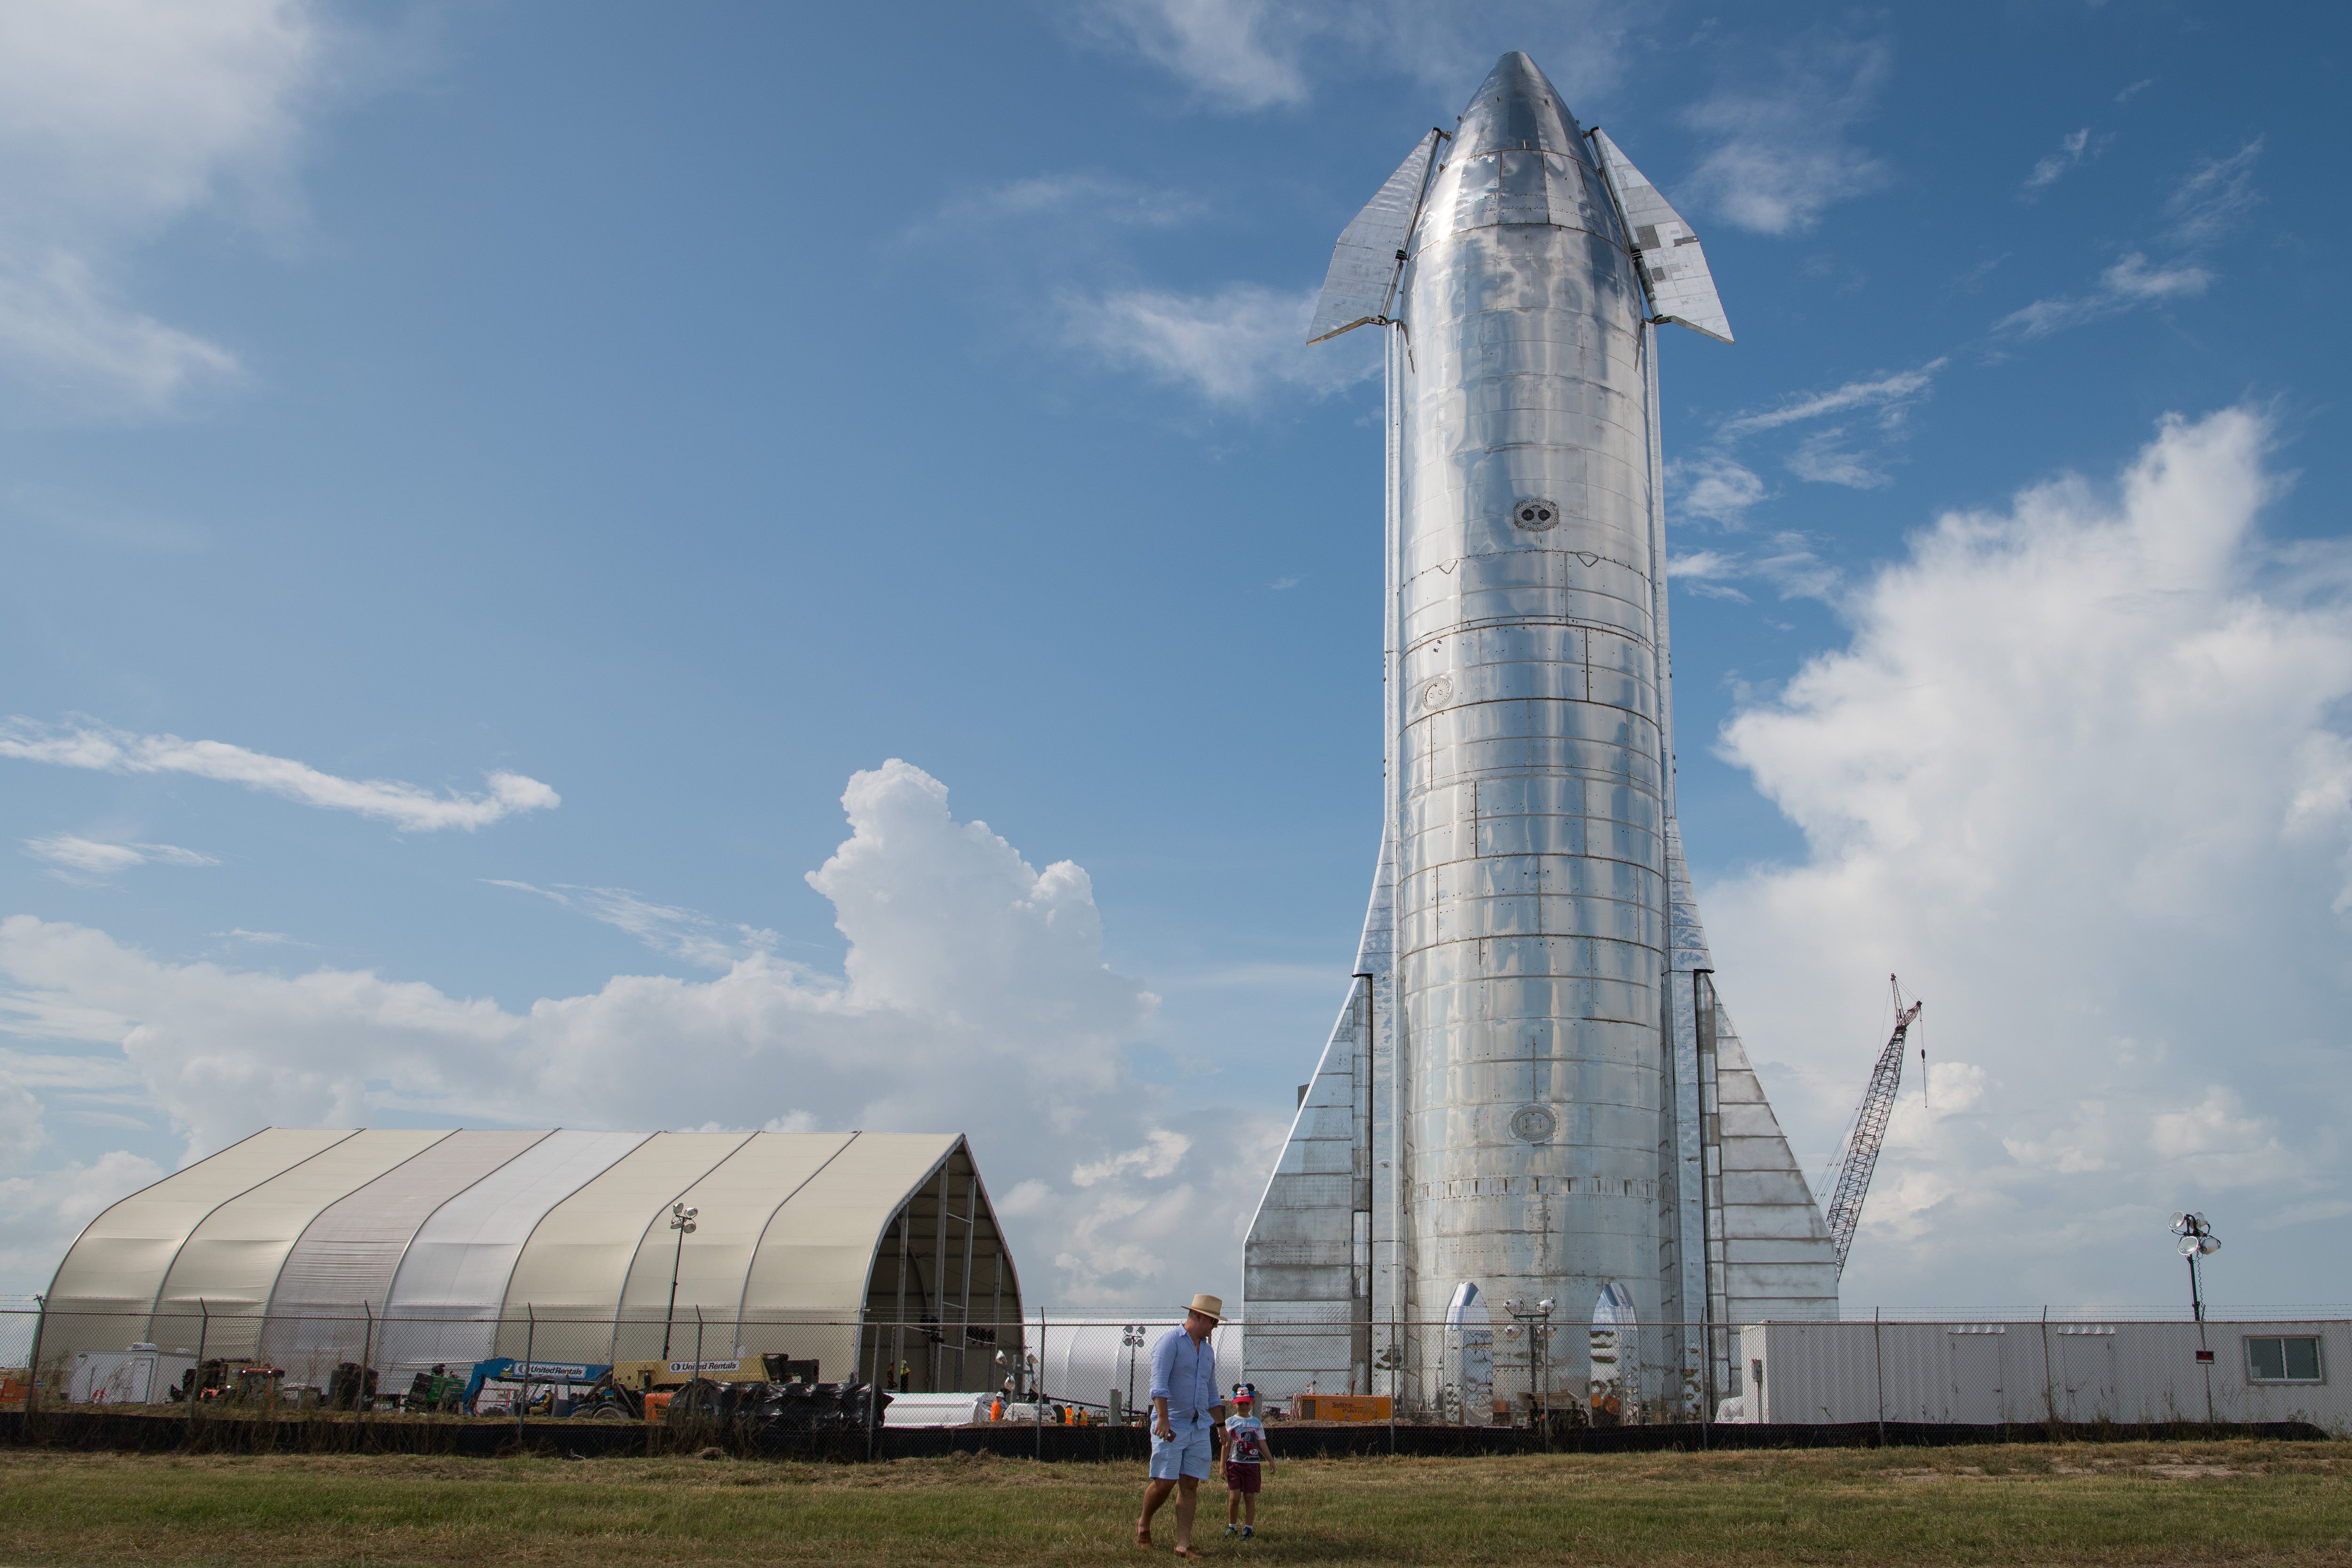 A prototype of SpaceX’s Starship spacecraft is seen at the company’s Texas launch facility on 28 September, 2019 in Boca Chica near Brownsville, Texas